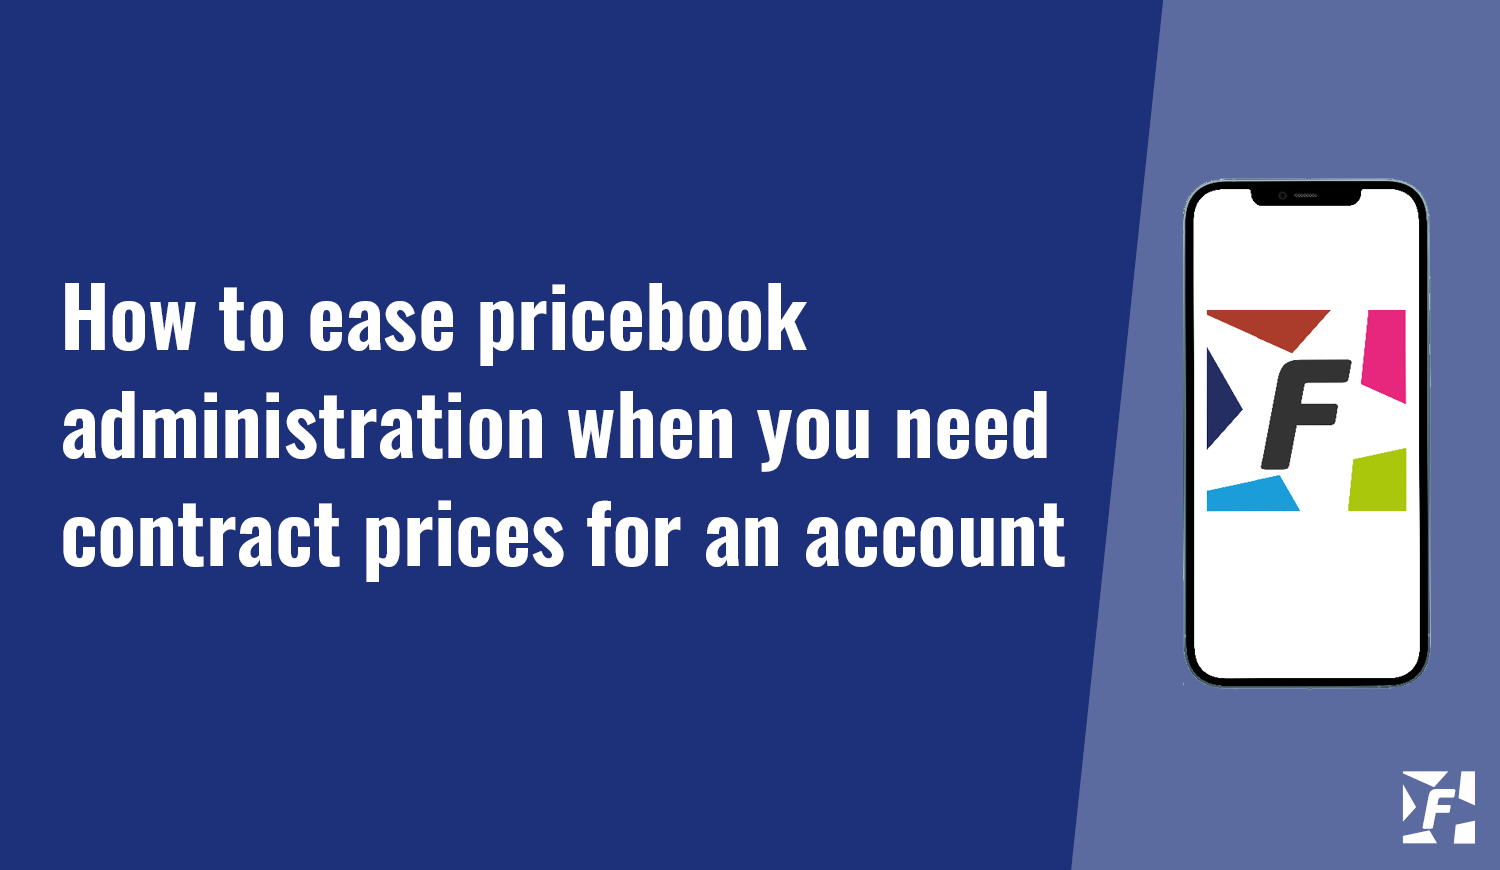 How to ease pricebook administration when you need contract prices for an account